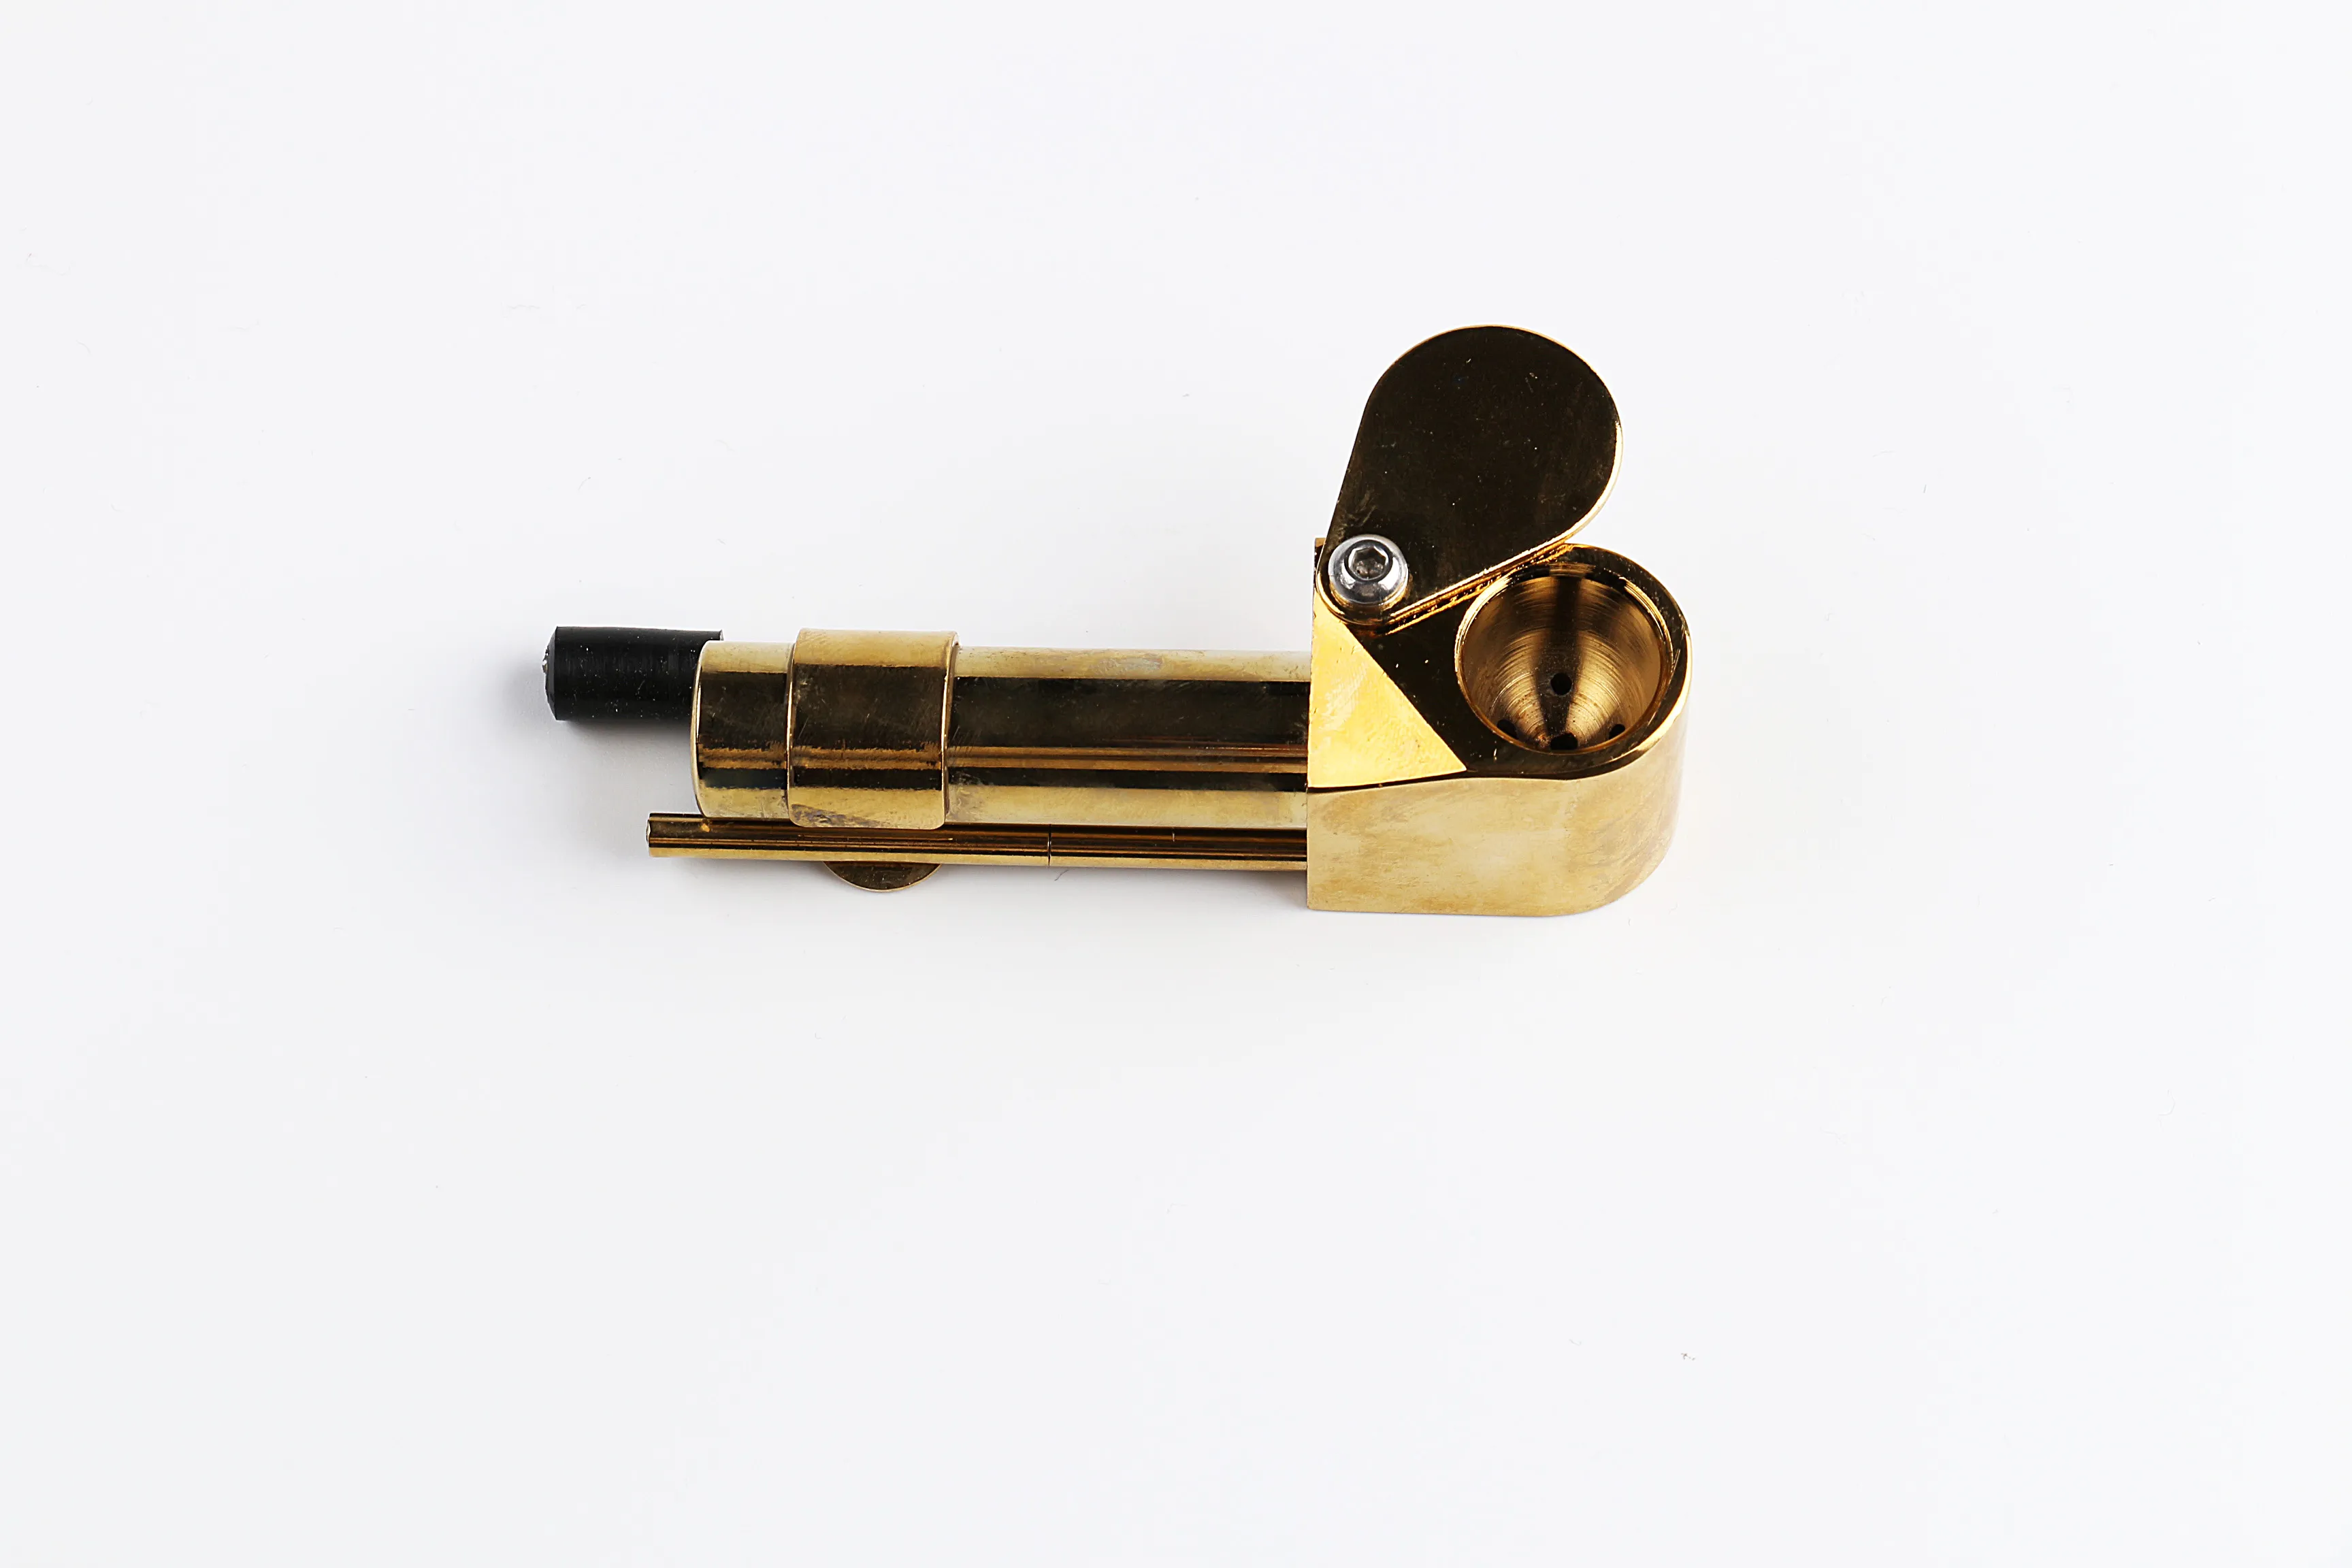 Cheap But High Quality Brass Proto Pipe Metal Dry Herb Smoking Tobacco Pipe  In Golden Siliver Color, Glass Bongs, Water Pipes Accessories From  Topglass, $6.22